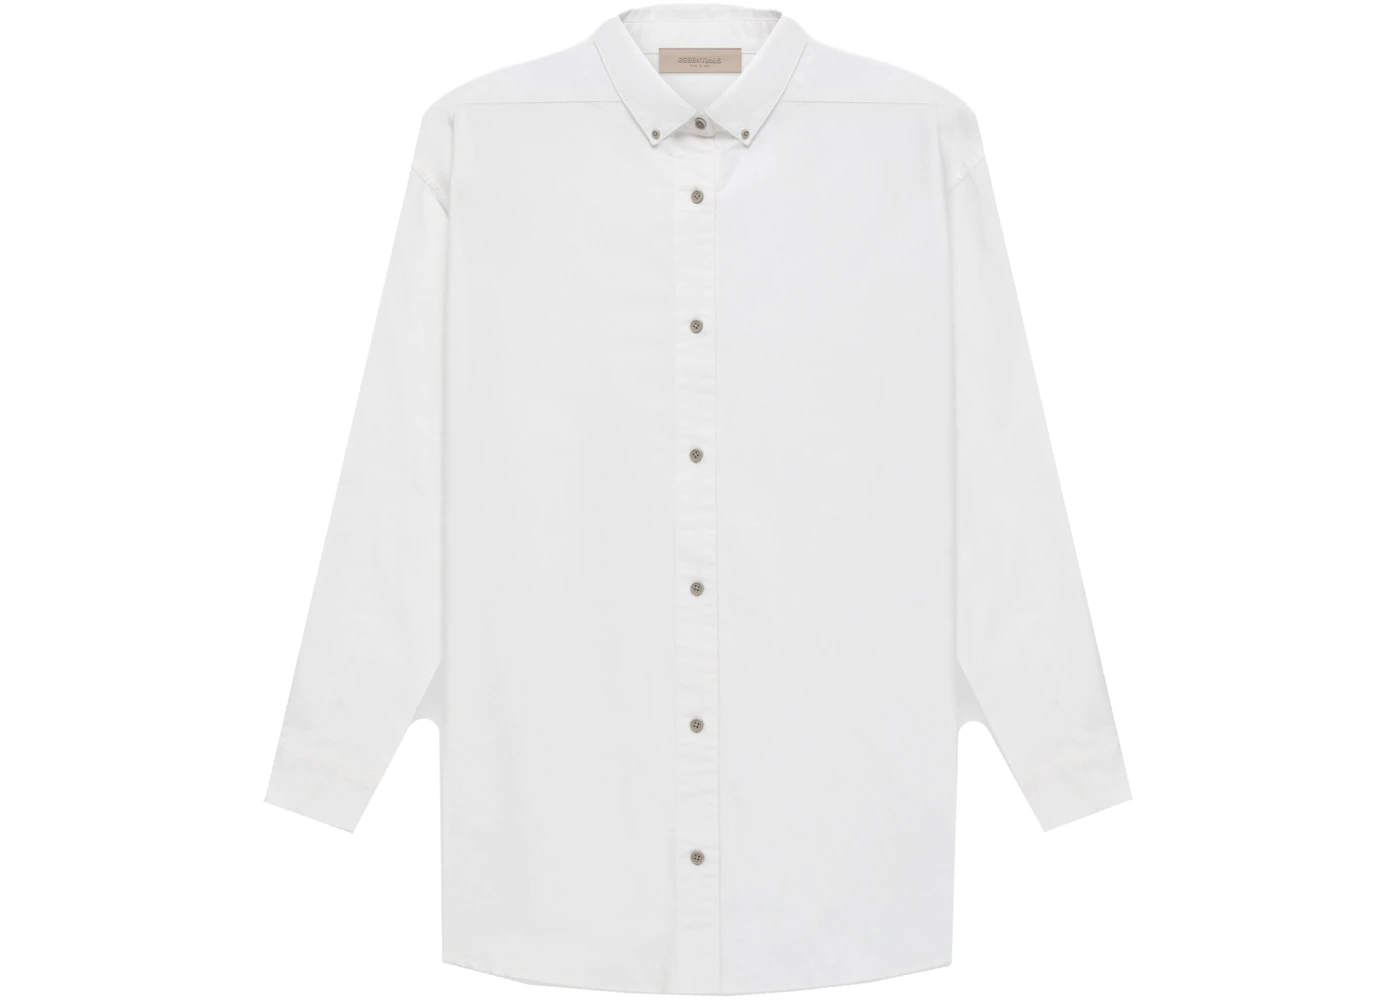 Fear of God Essentials Women's Oxford White - SS22 - GB